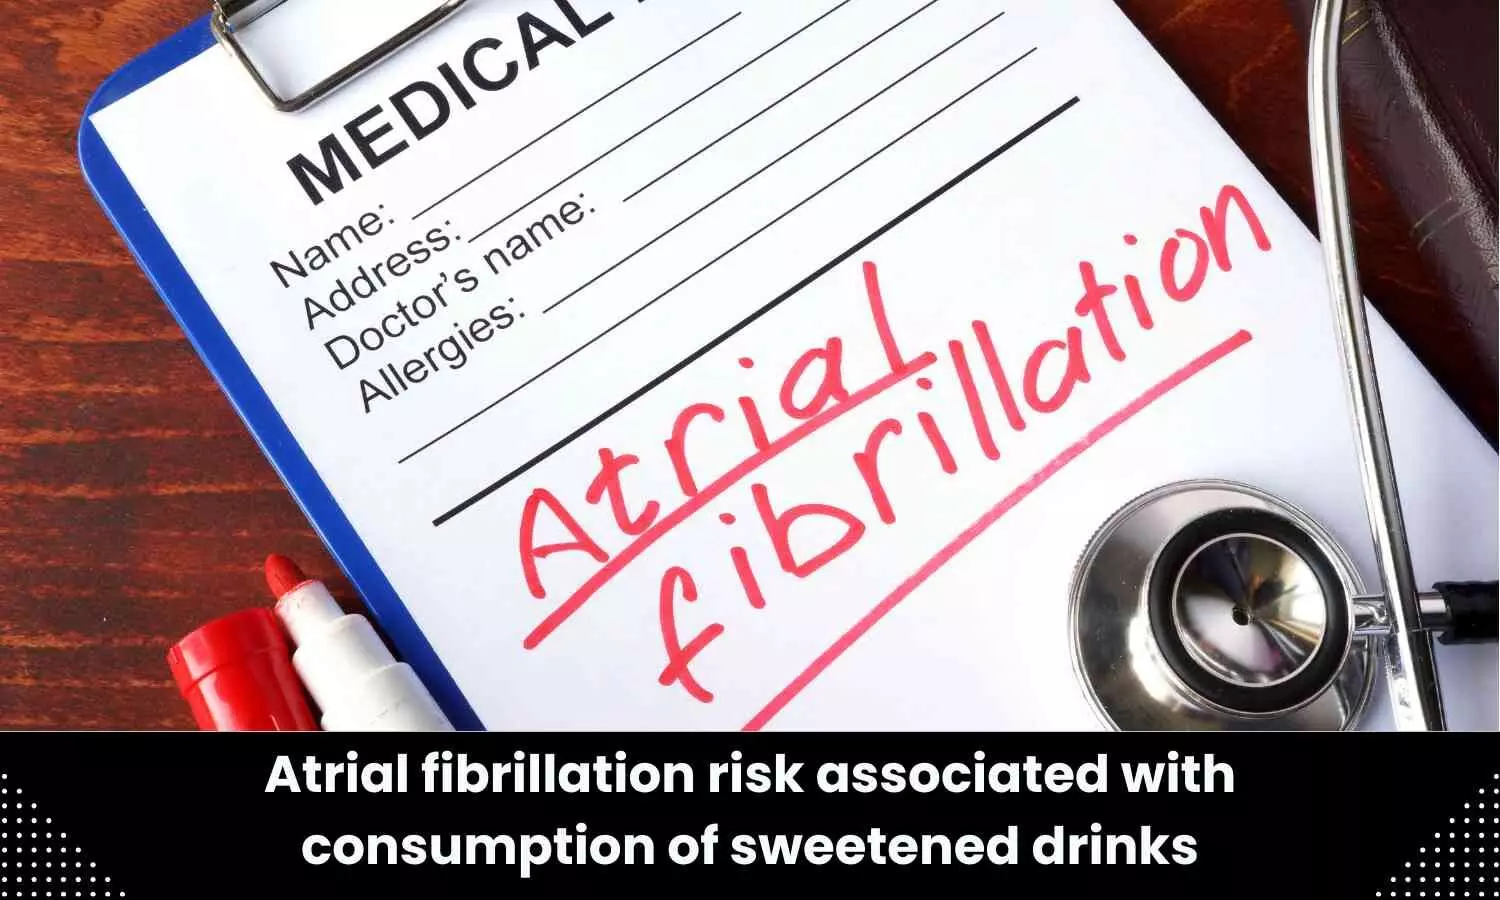 Atrial fibrillation risk associated with consumption of sweetened drinks